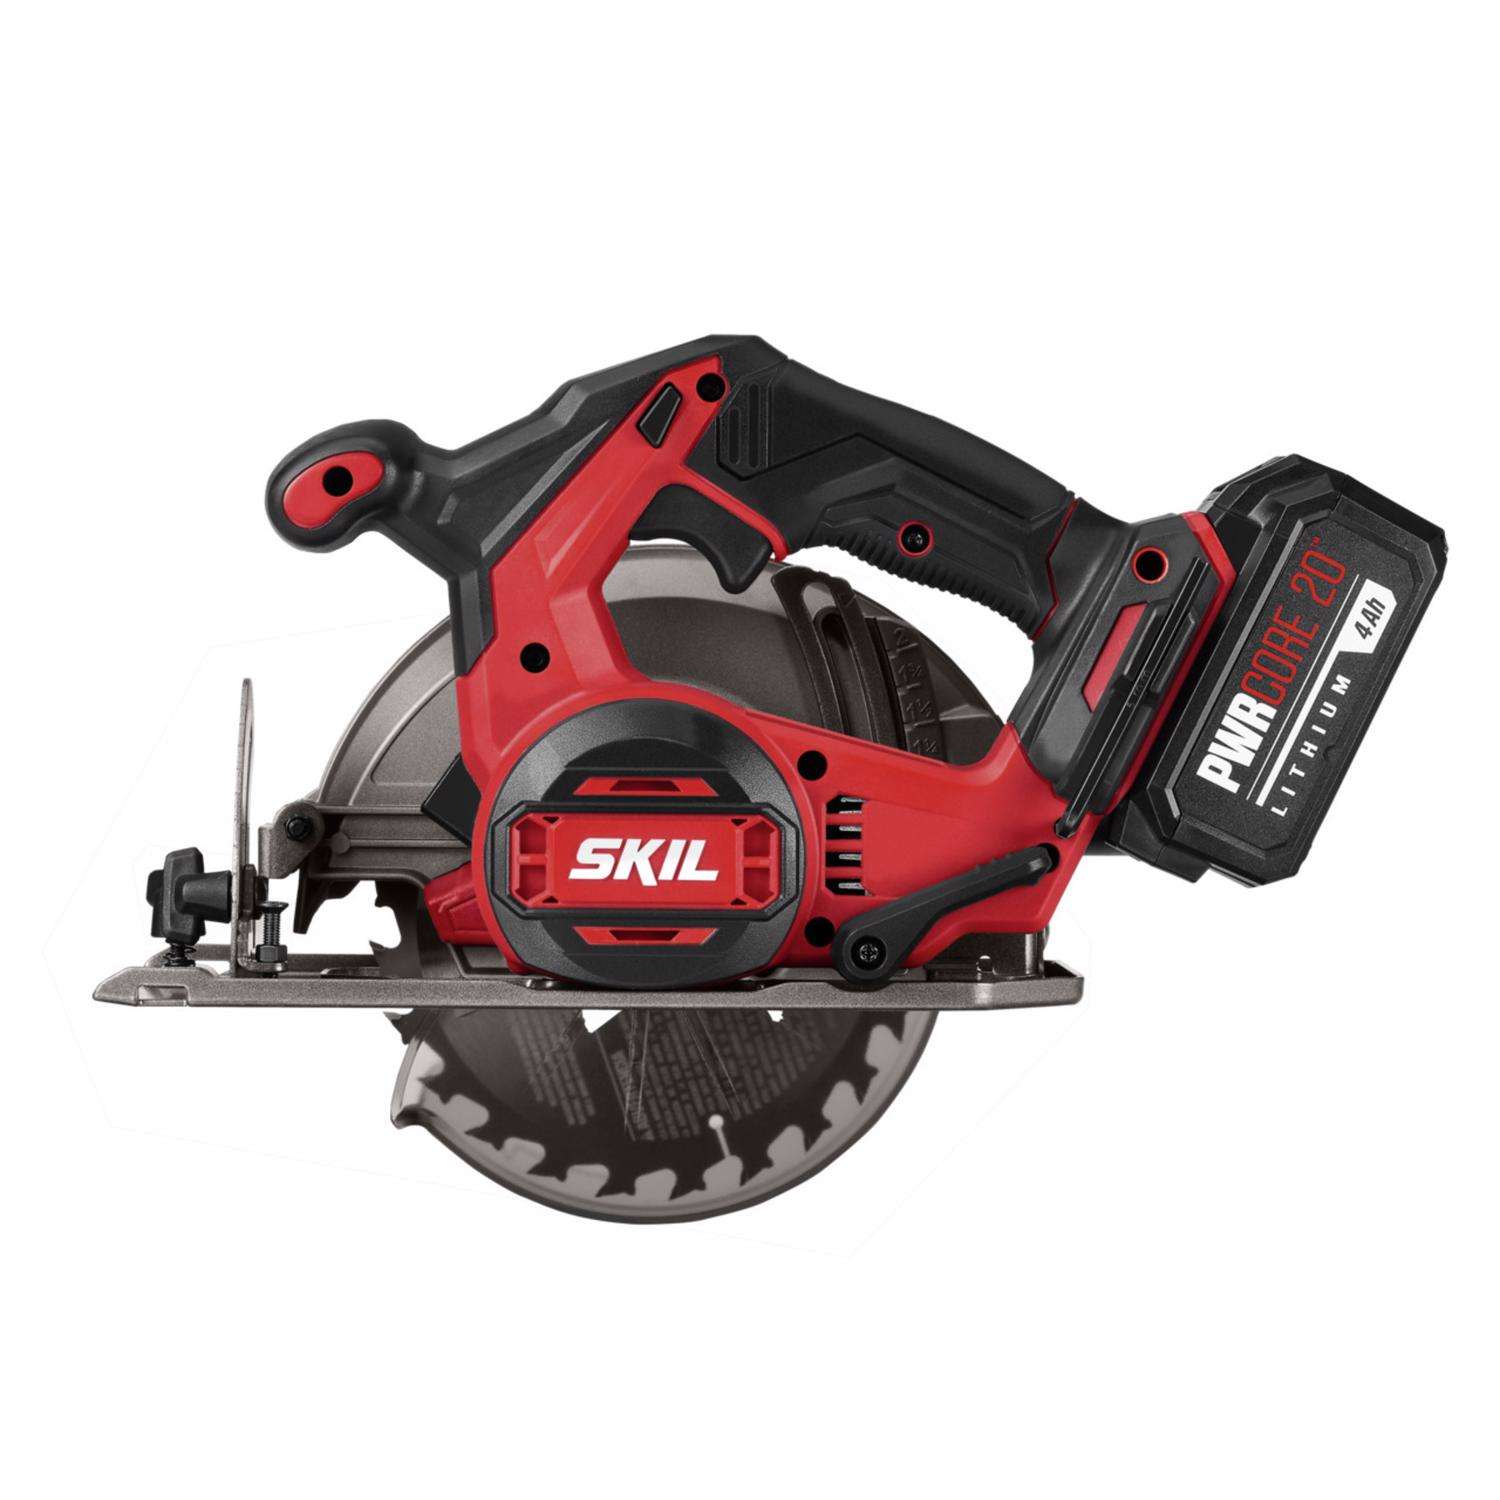 SKIL PWR CORE 20 Brushless 20V 6-1 2'' Circular Saw Kit, Includes 4.0 Ah Battery, PWR ASSIST UBS Adapter AND PWR JUMP Chargers CR5413-1A - 5